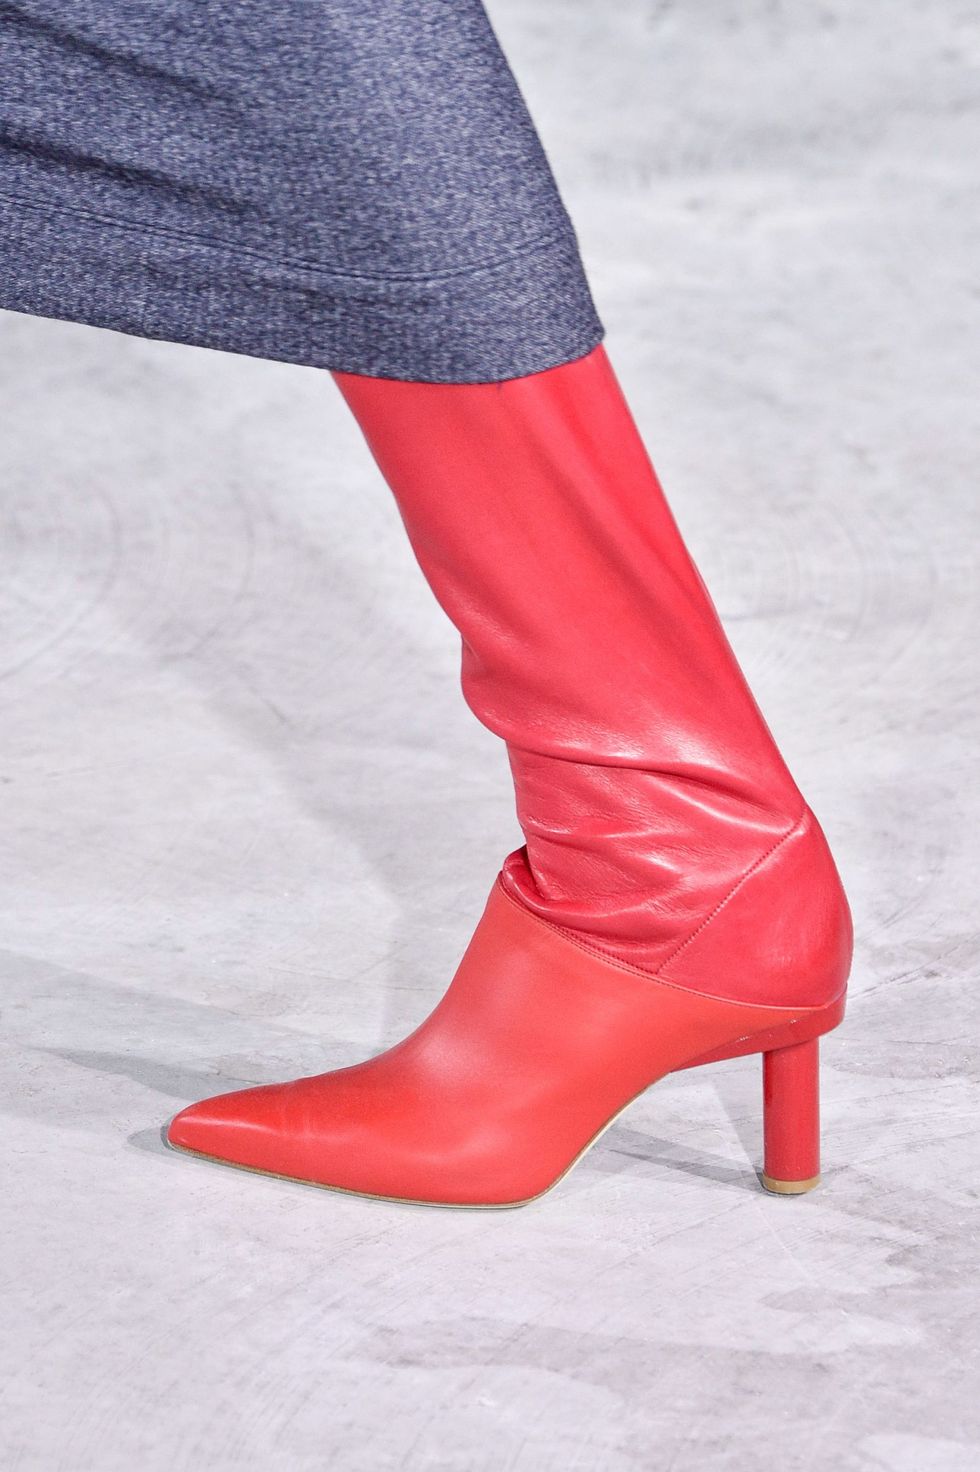 Footwear, Red, Boot, Shoe, High heels, Fashion, Knee-high boot, Leg, Leather, Haute couture, 